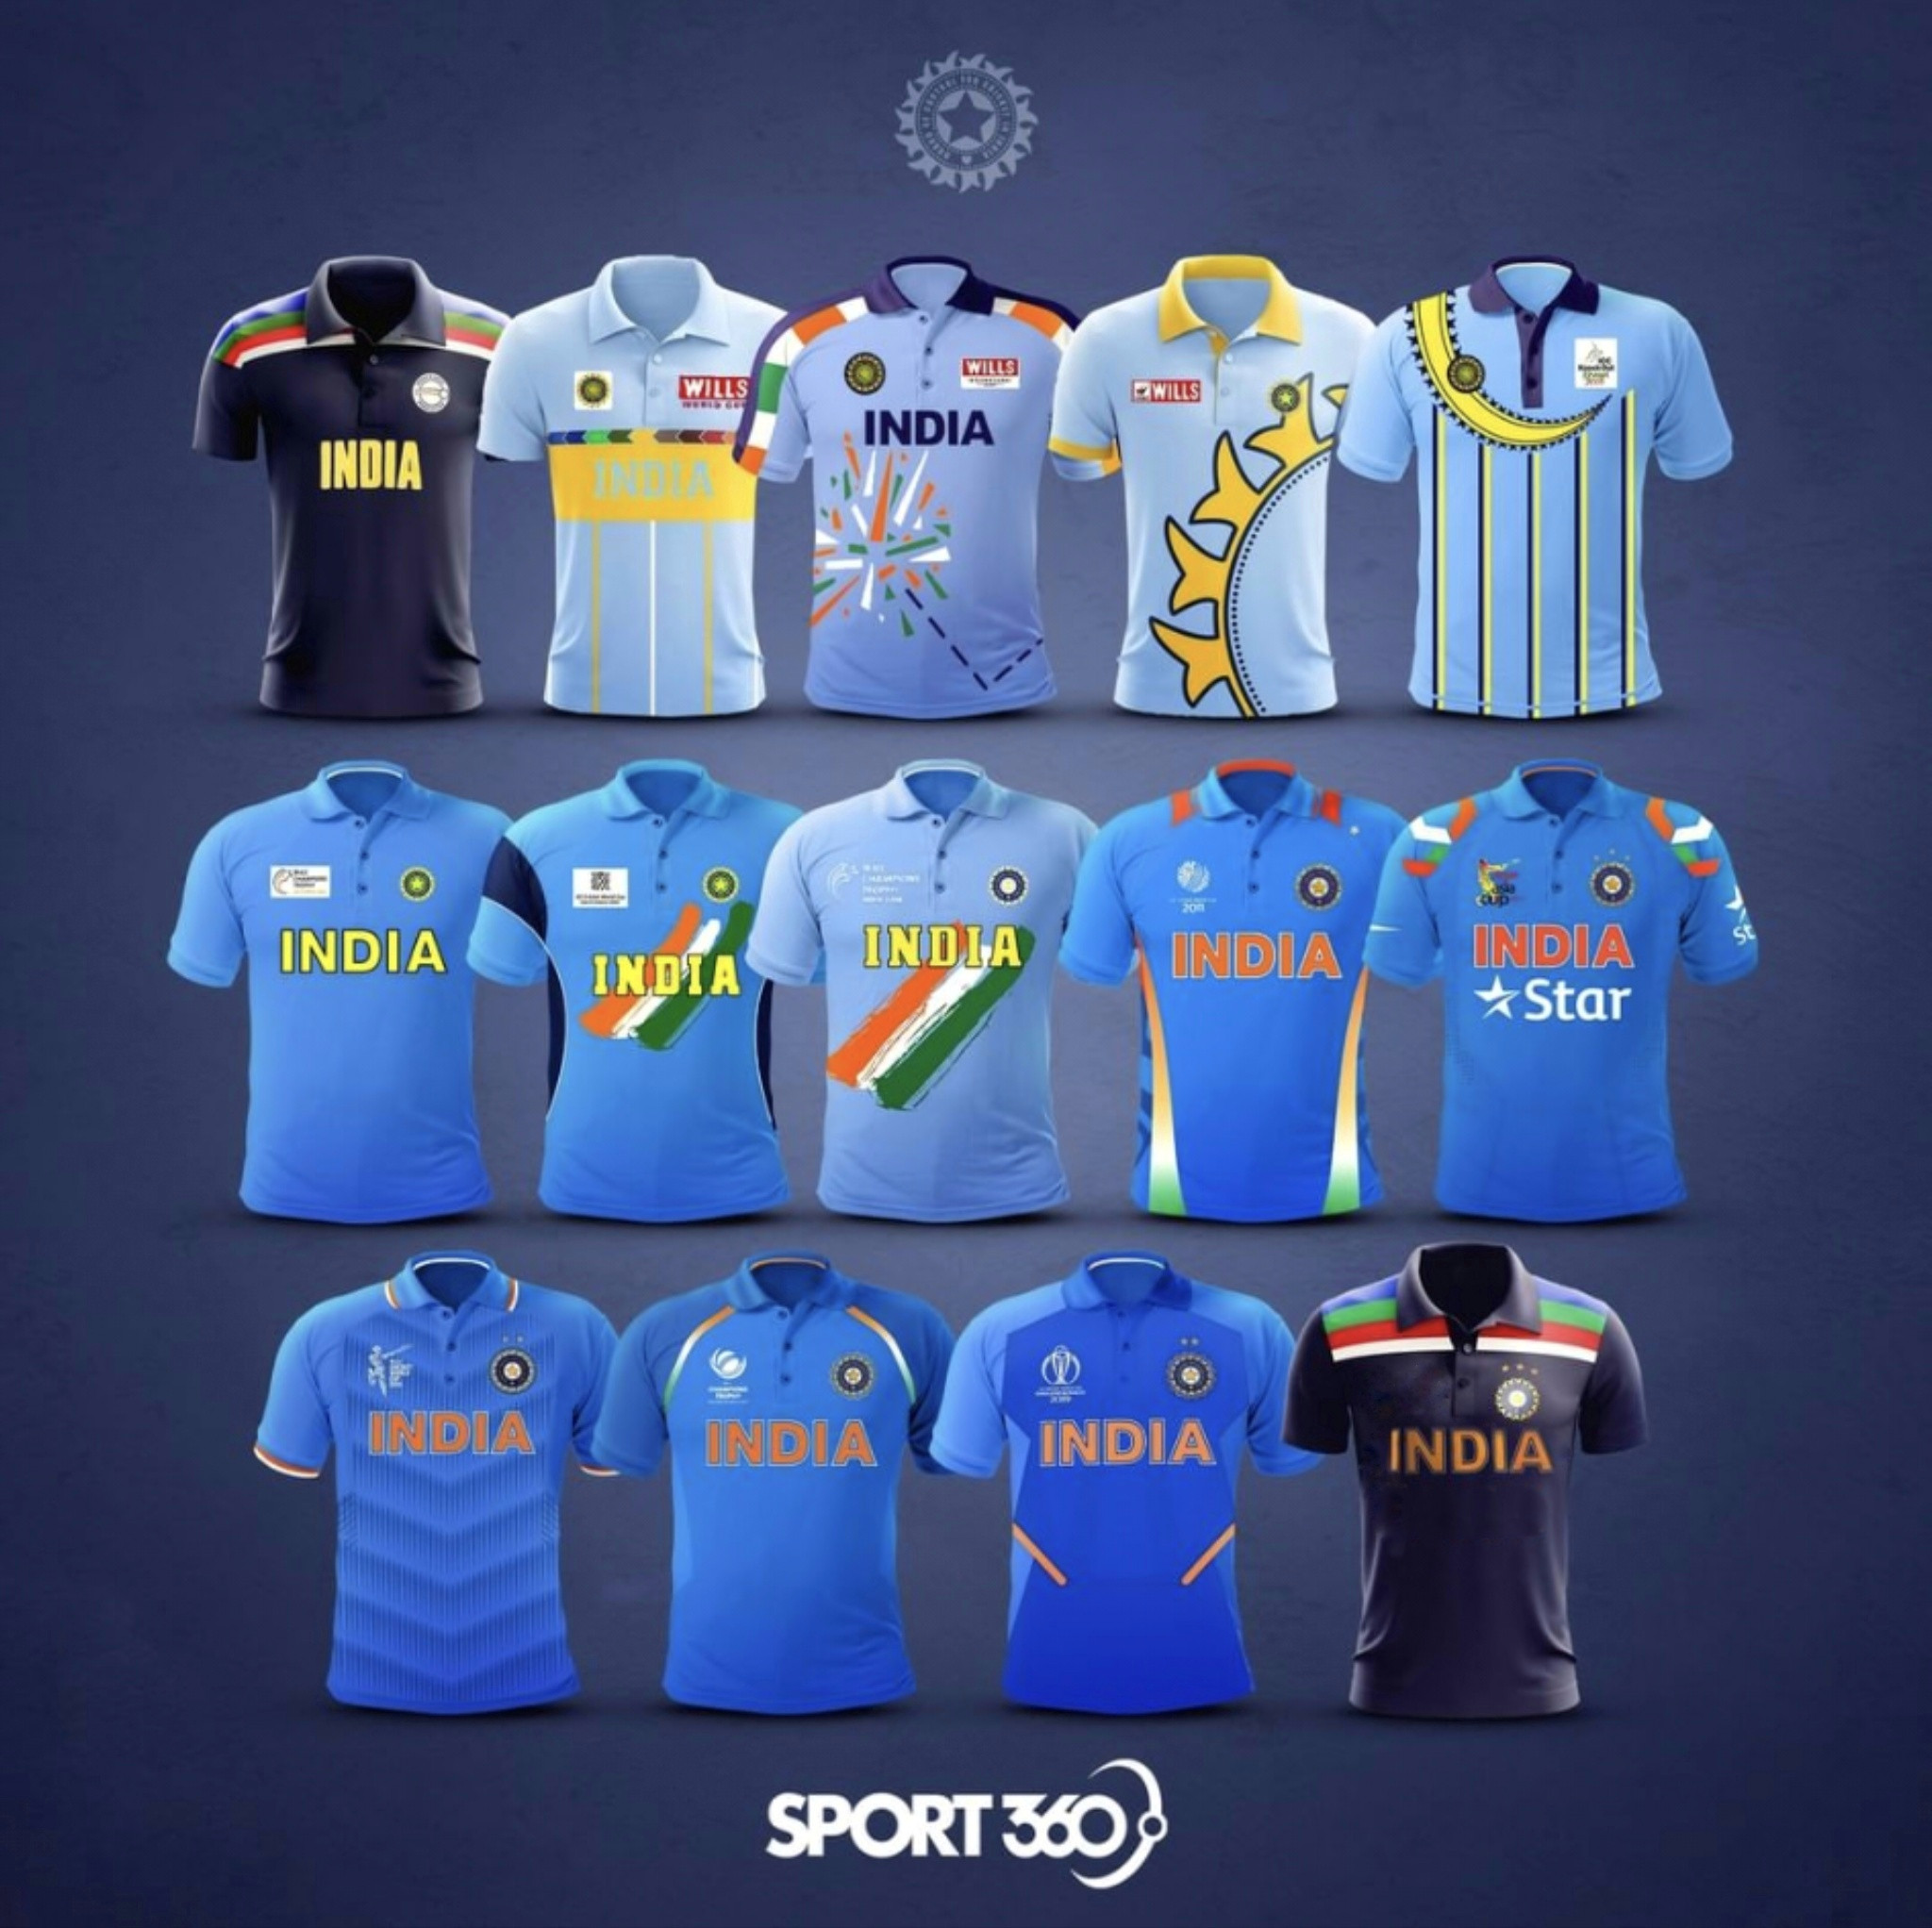 Evolution Of India's World Cup Cricket Jersey Brown History lupon